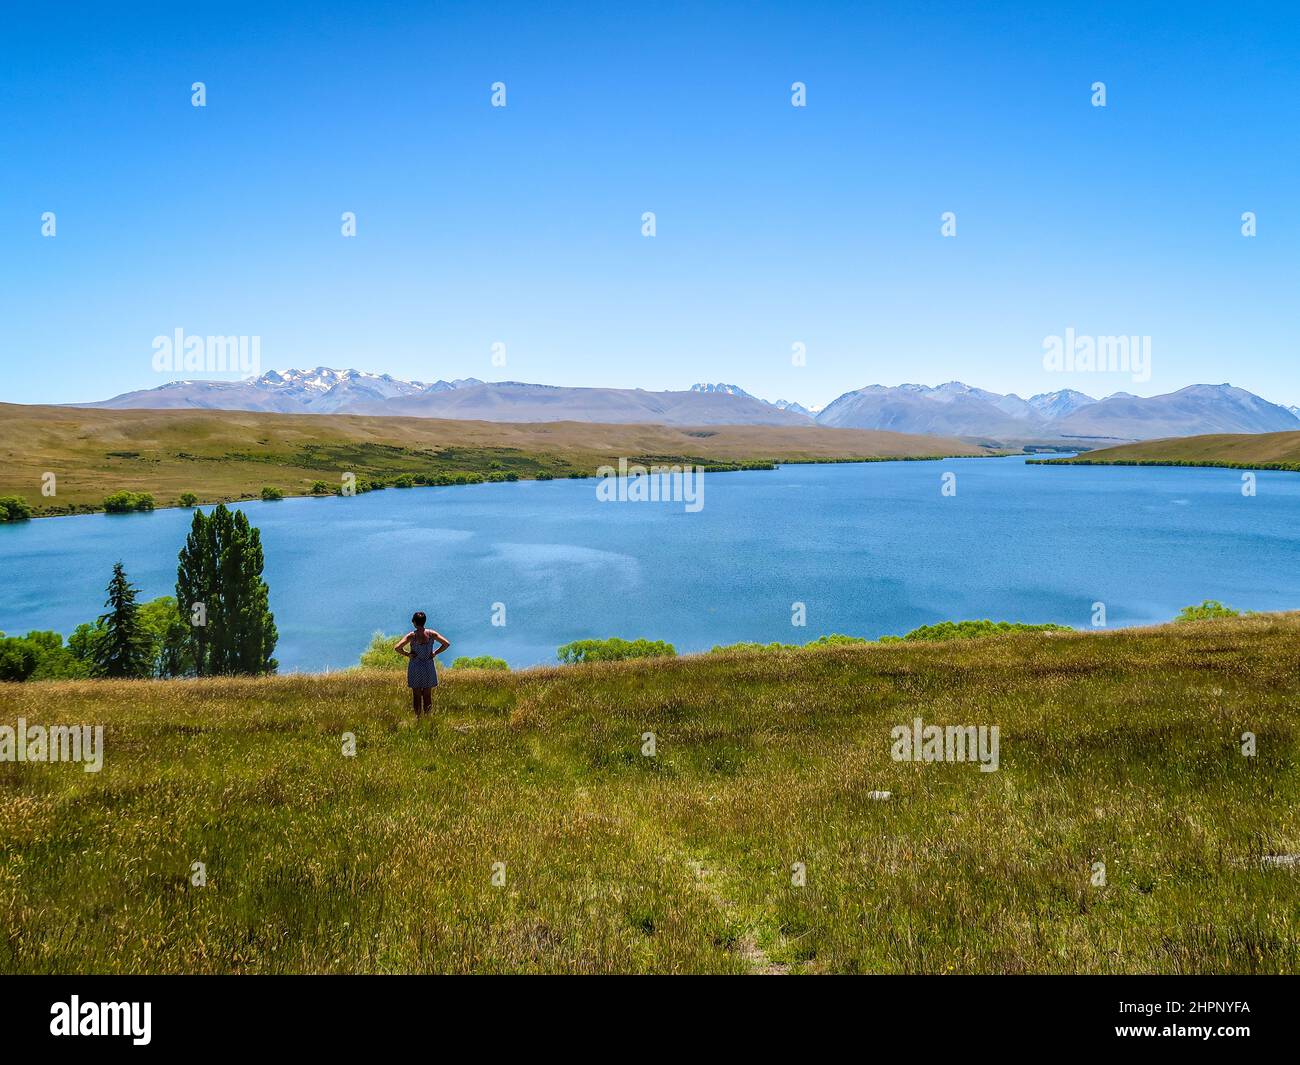 A female tourists stops to enjoy the scenic view towards the mountains above Lake Alexandrina, in Canterbury, New Zealand Stock Photo